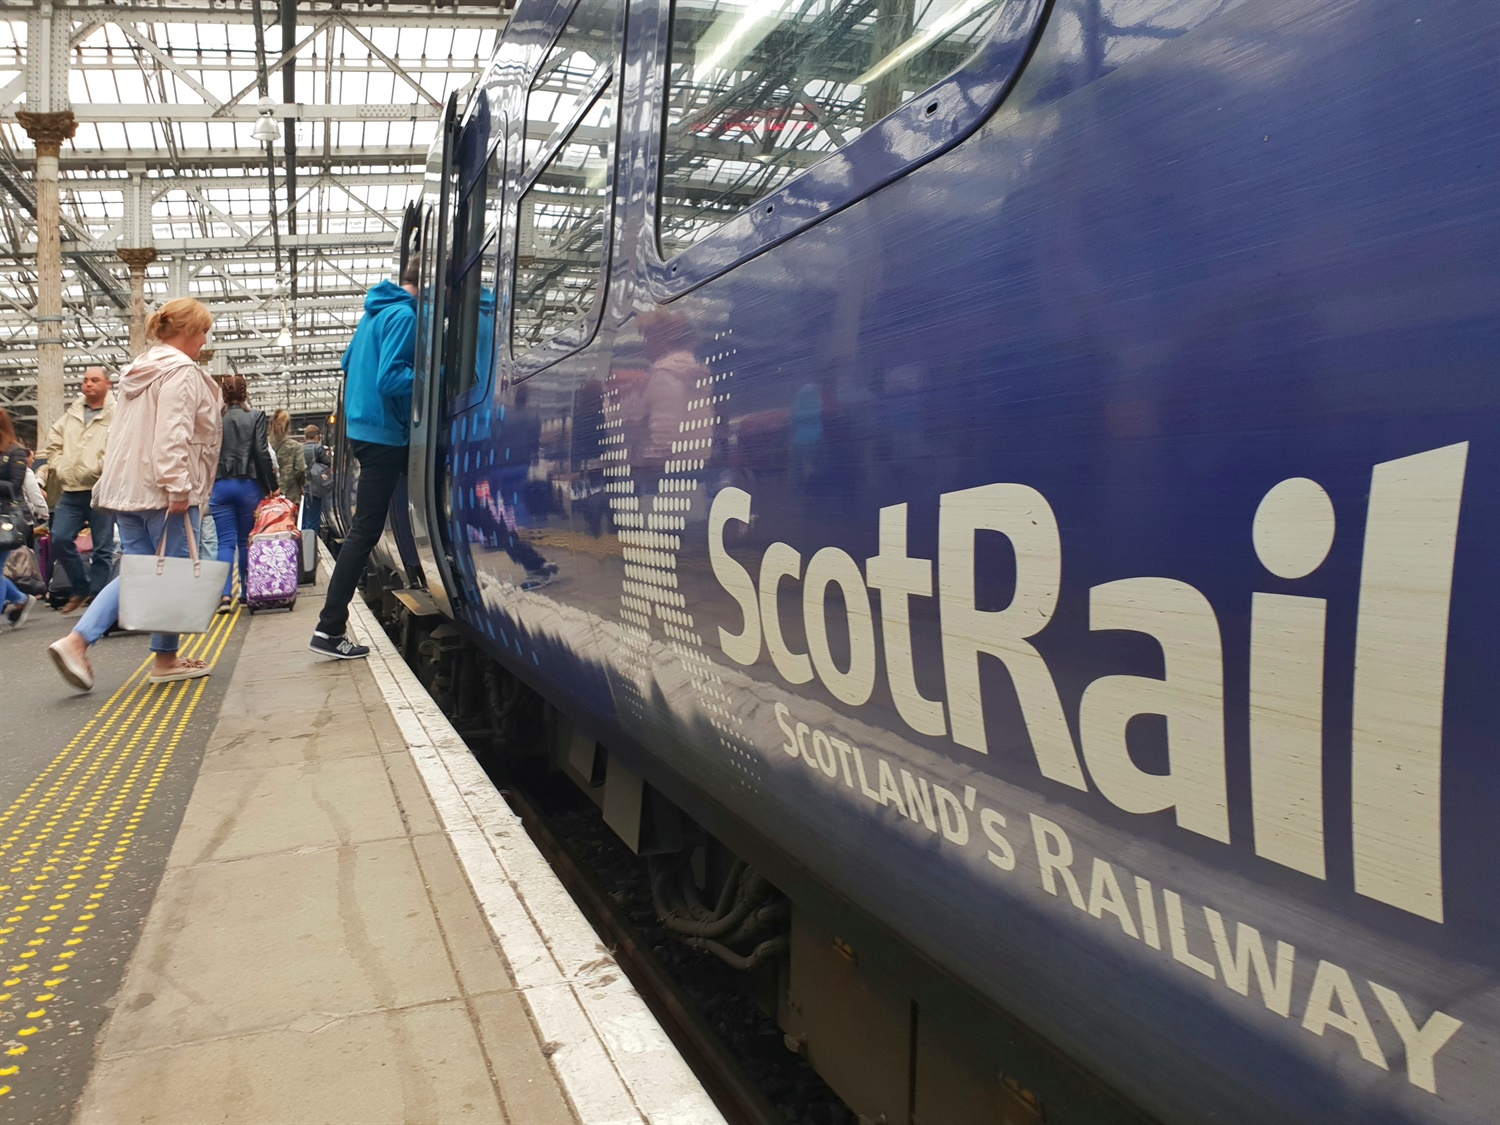 Public sector bidders will be allowed to compete for ScotRail franchise